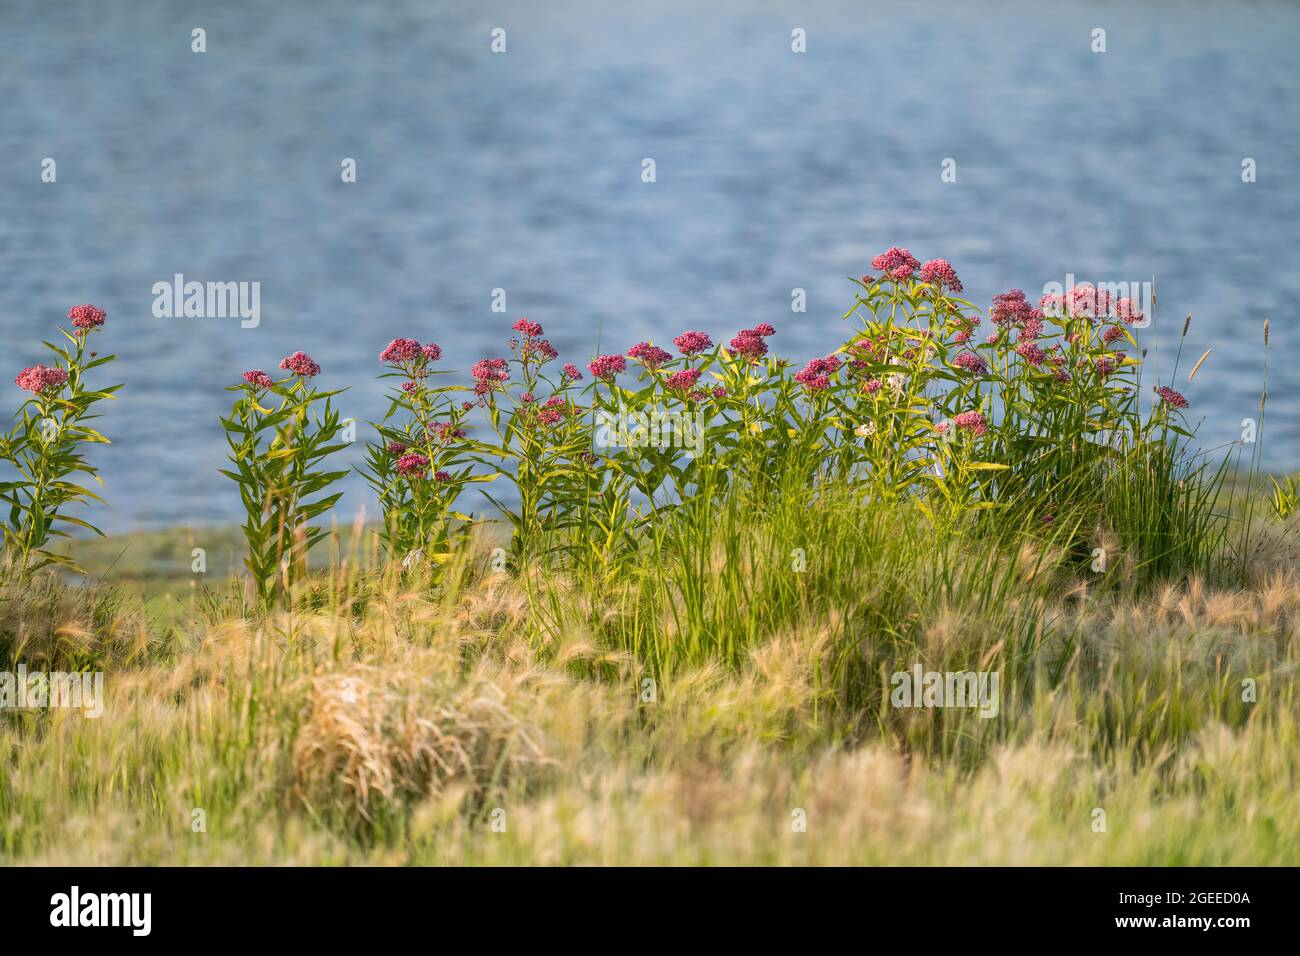 A row of Swamp Milkweed plants in full bloom growing by the shoreline of a lake at the height of its season in mid July in Colorado. Stock Photo